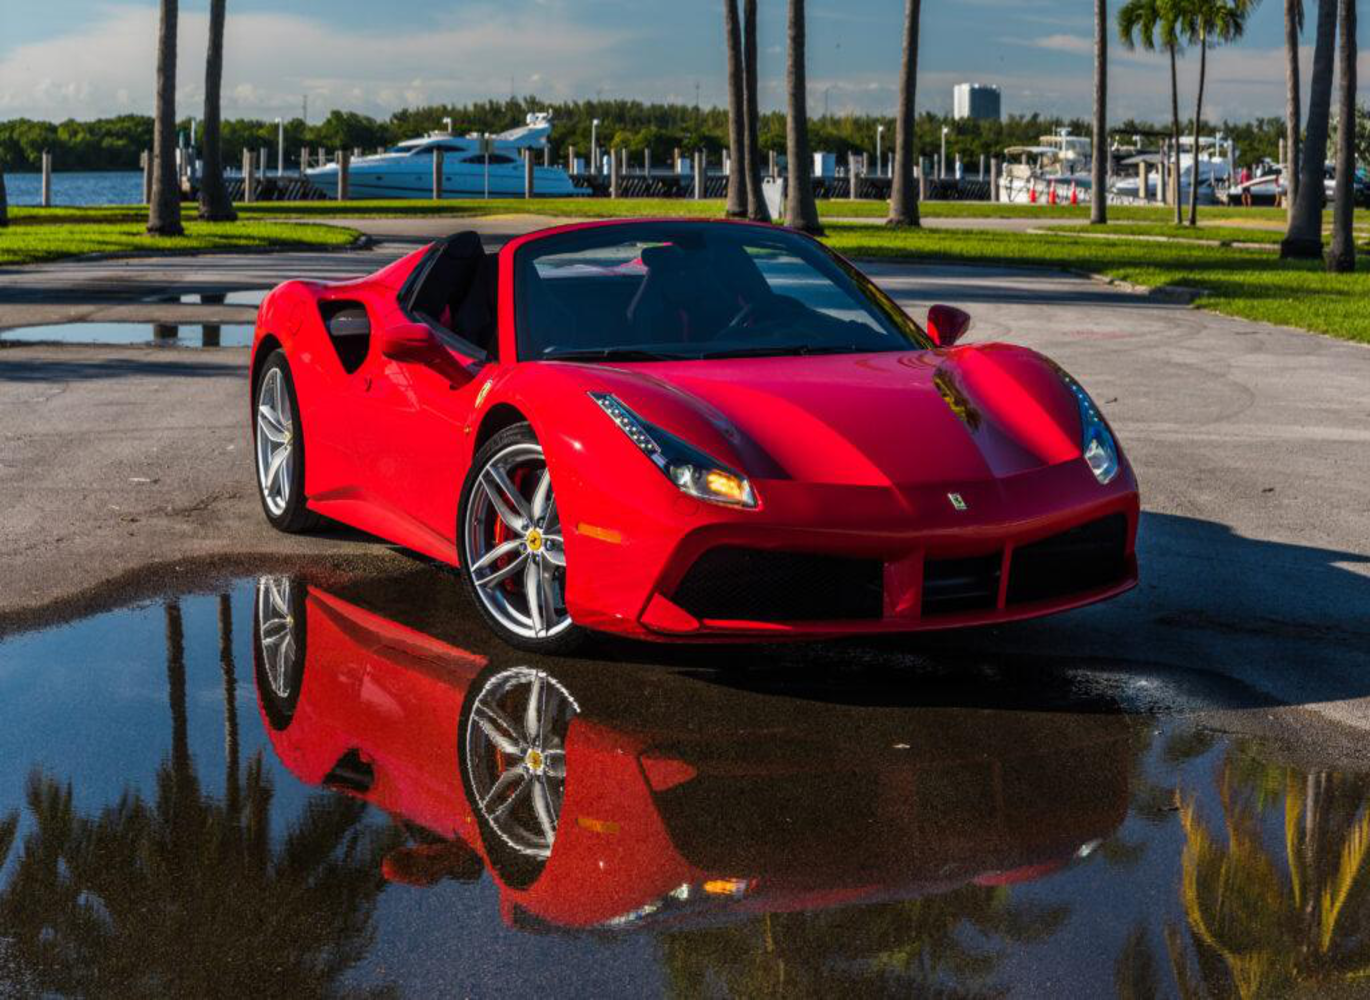 Why rent a luxury car in Miami?